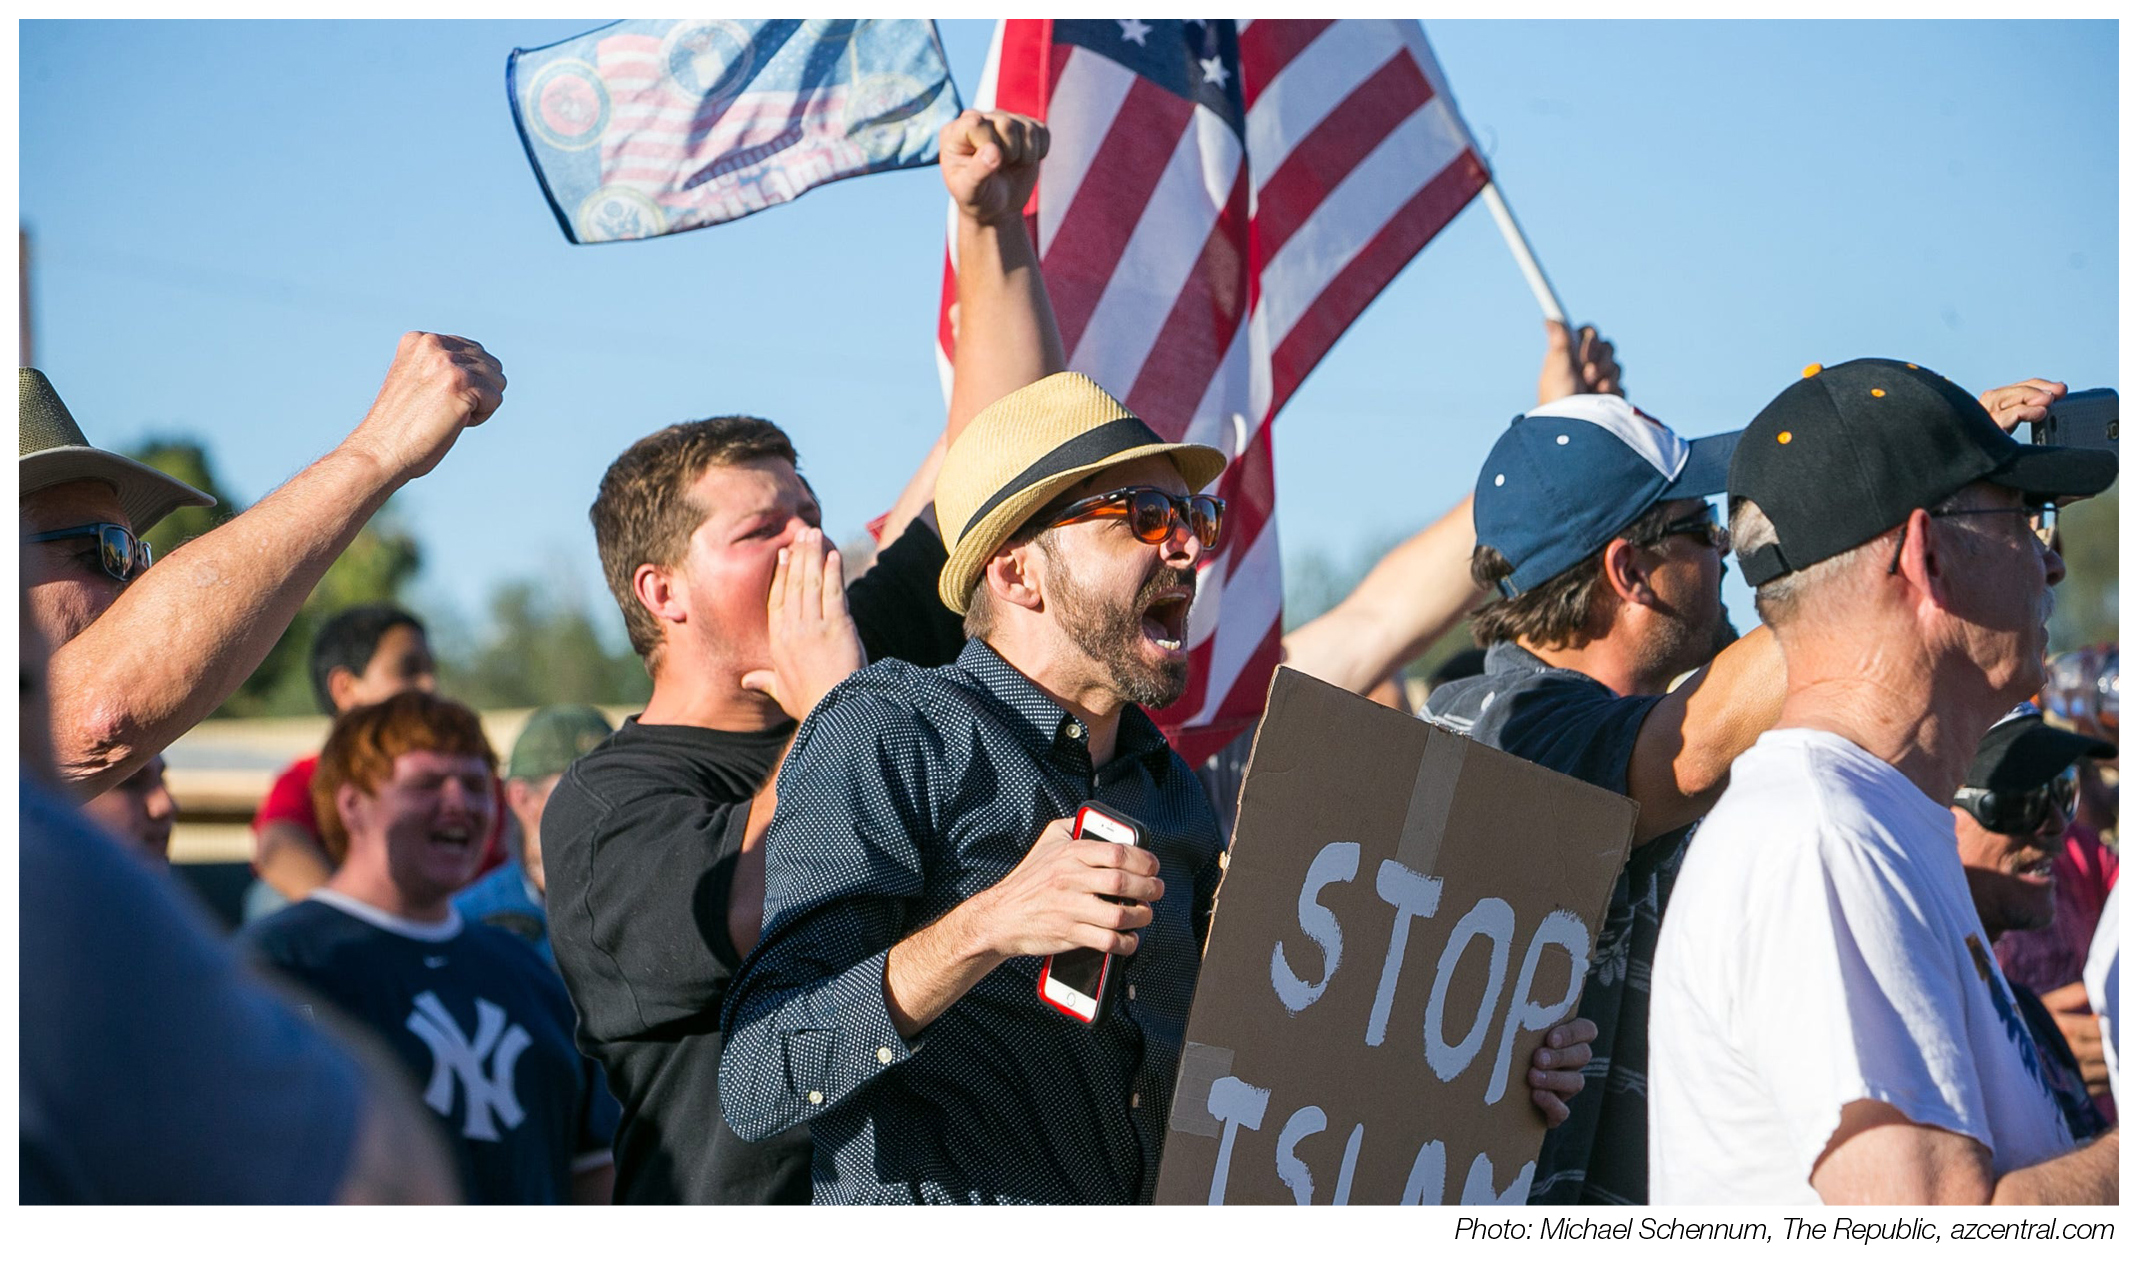 A crowd of protesting, yelling men. One carries a sign reading "stop Islam". An American flag is held in the back.